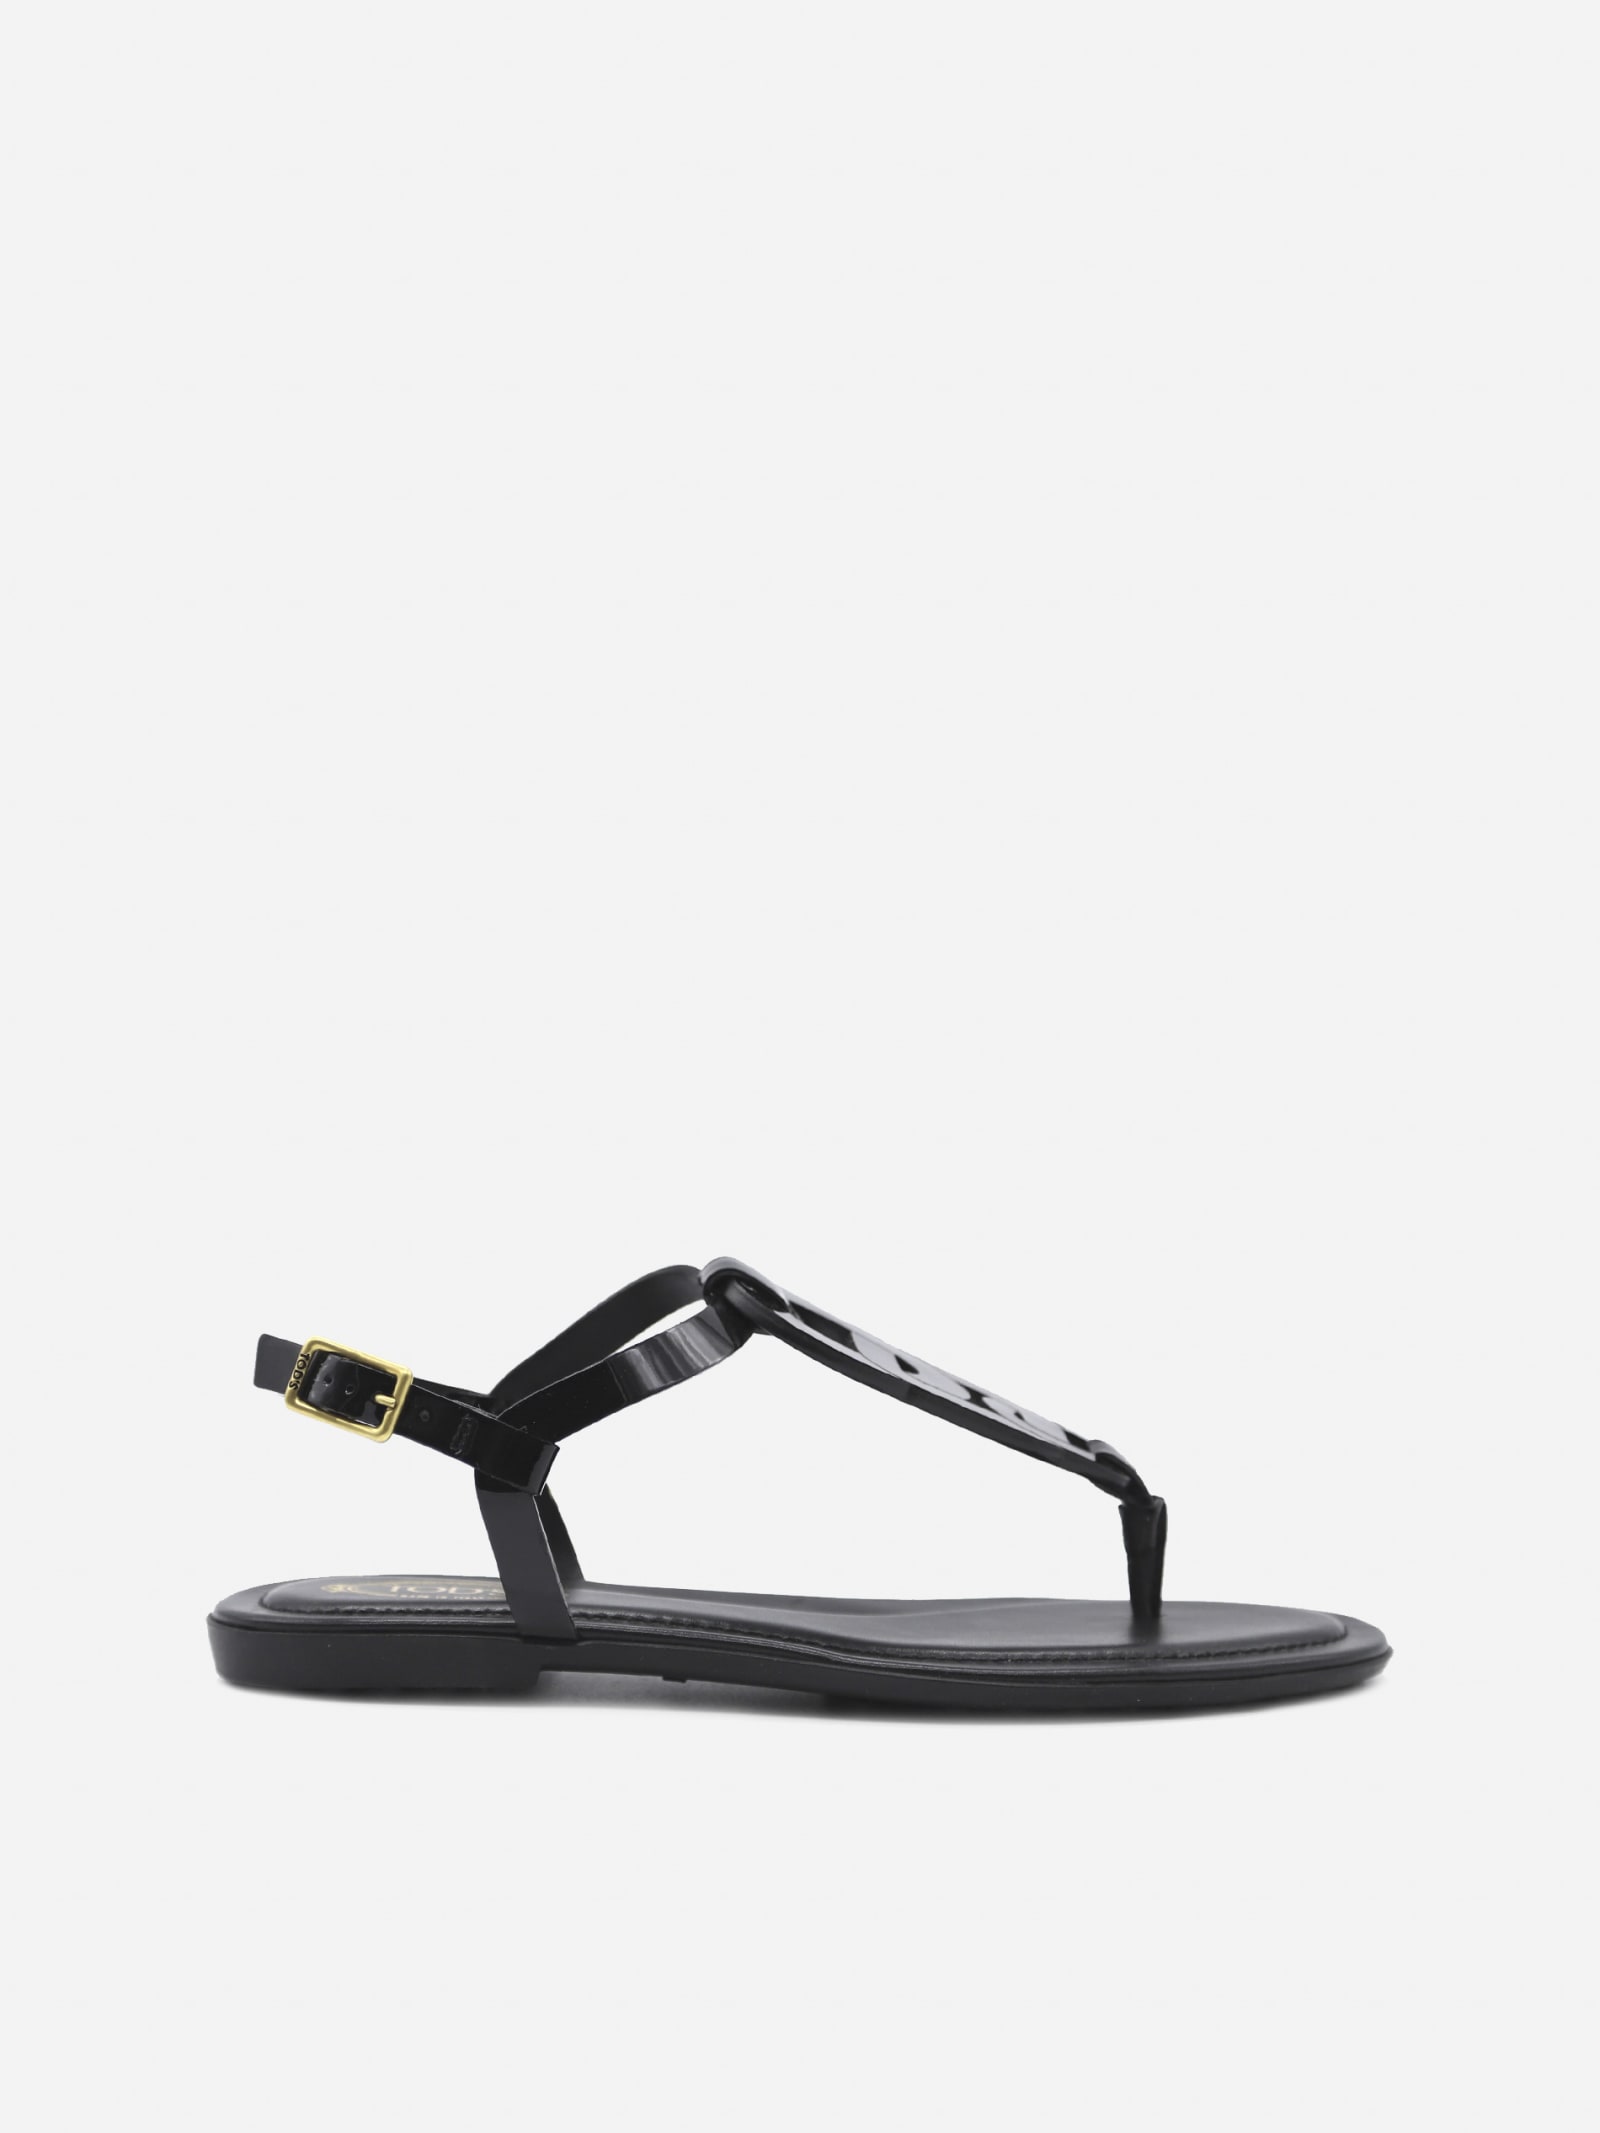 Tods Sandals With Upper Detail Made Of Leather